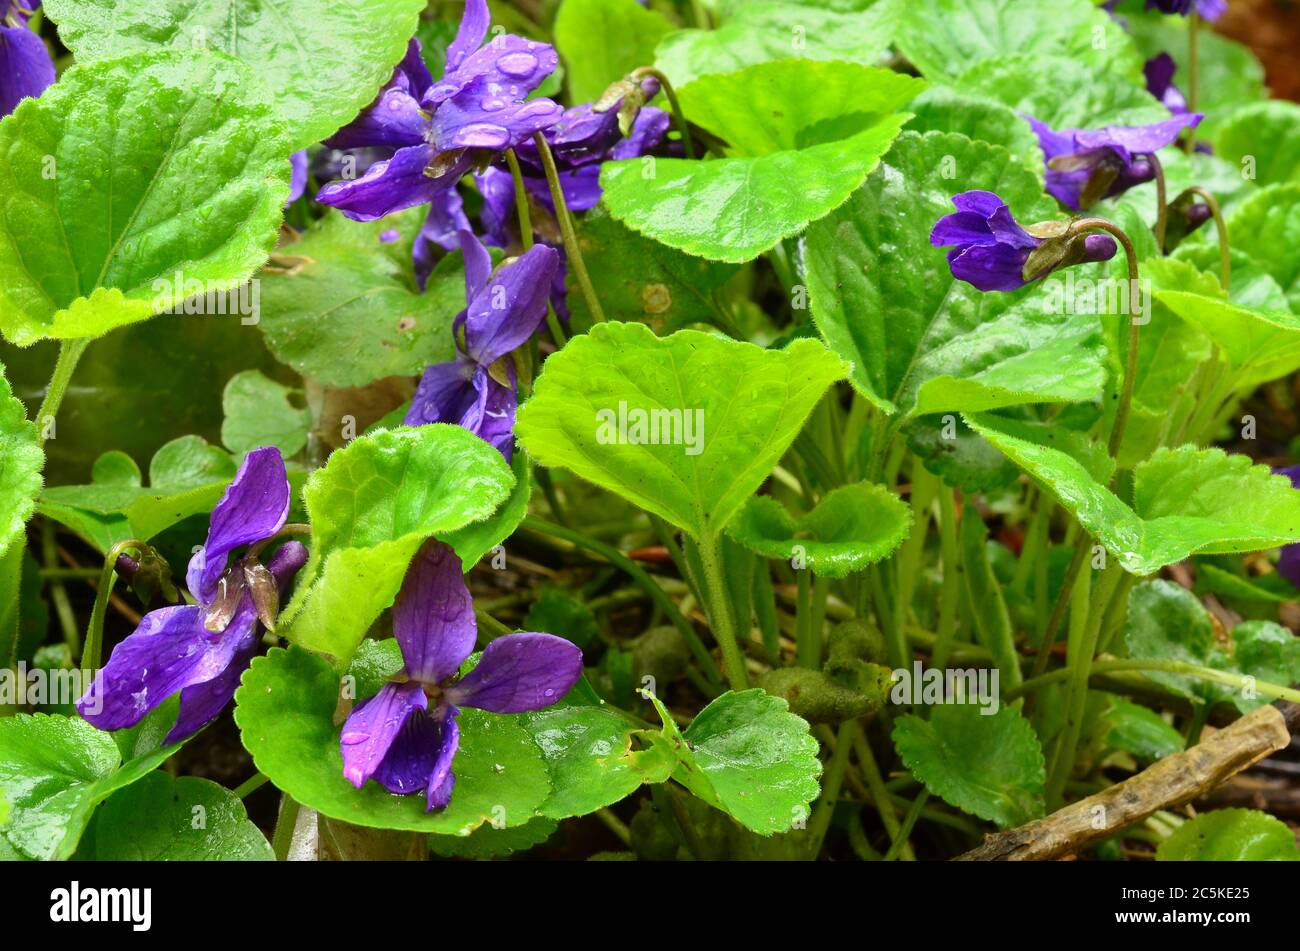 Wild violets with raindrops after heavy spring rain, close up view Stock Photo